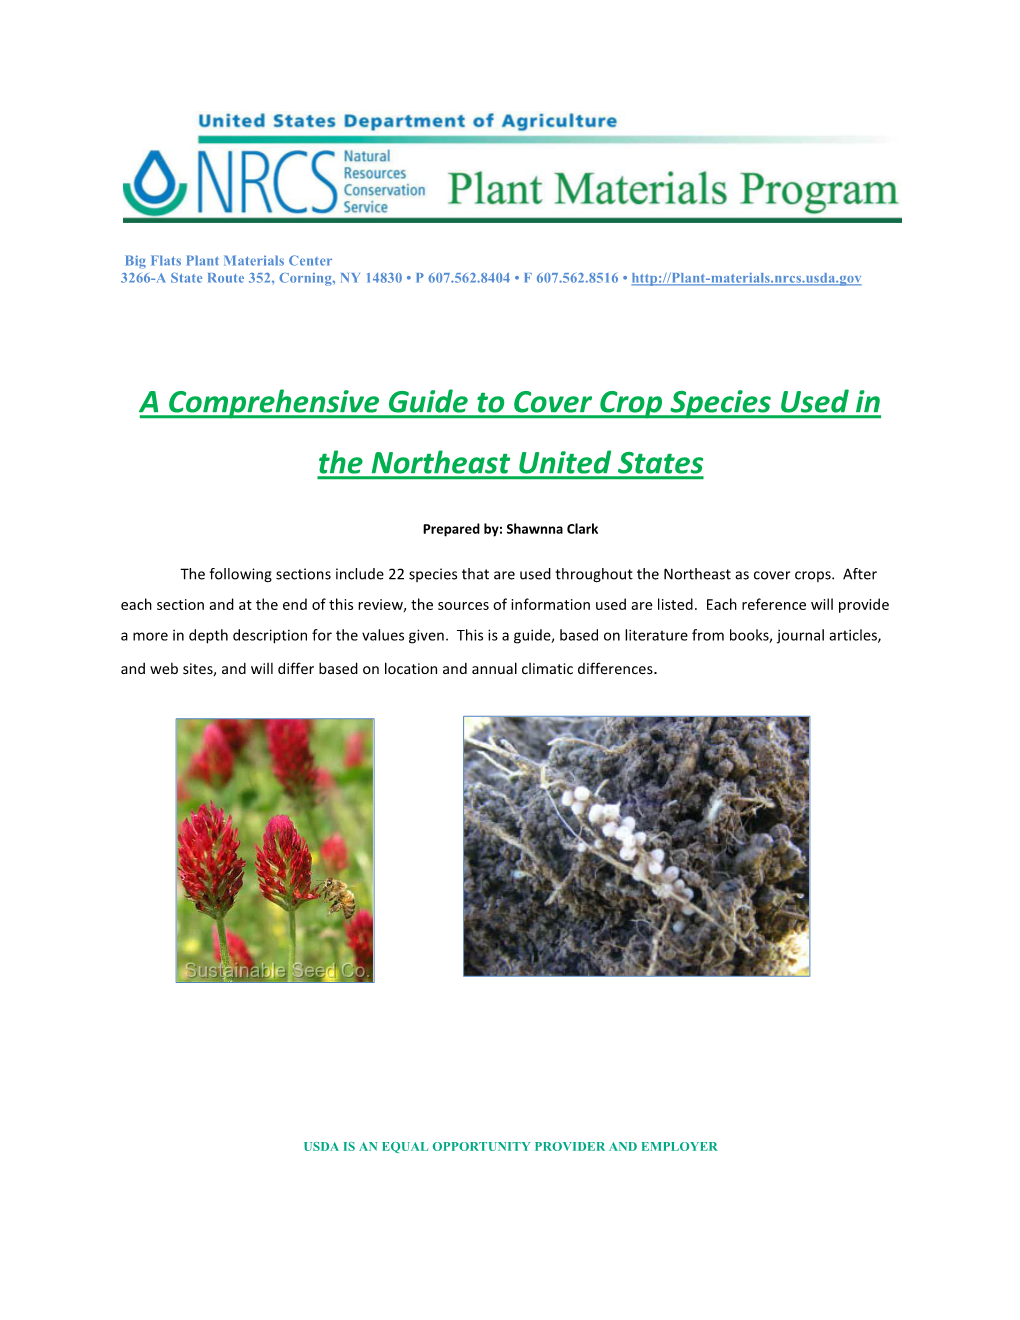 A Comprehensive Guide of Cover Crop Species Used in the Northeast